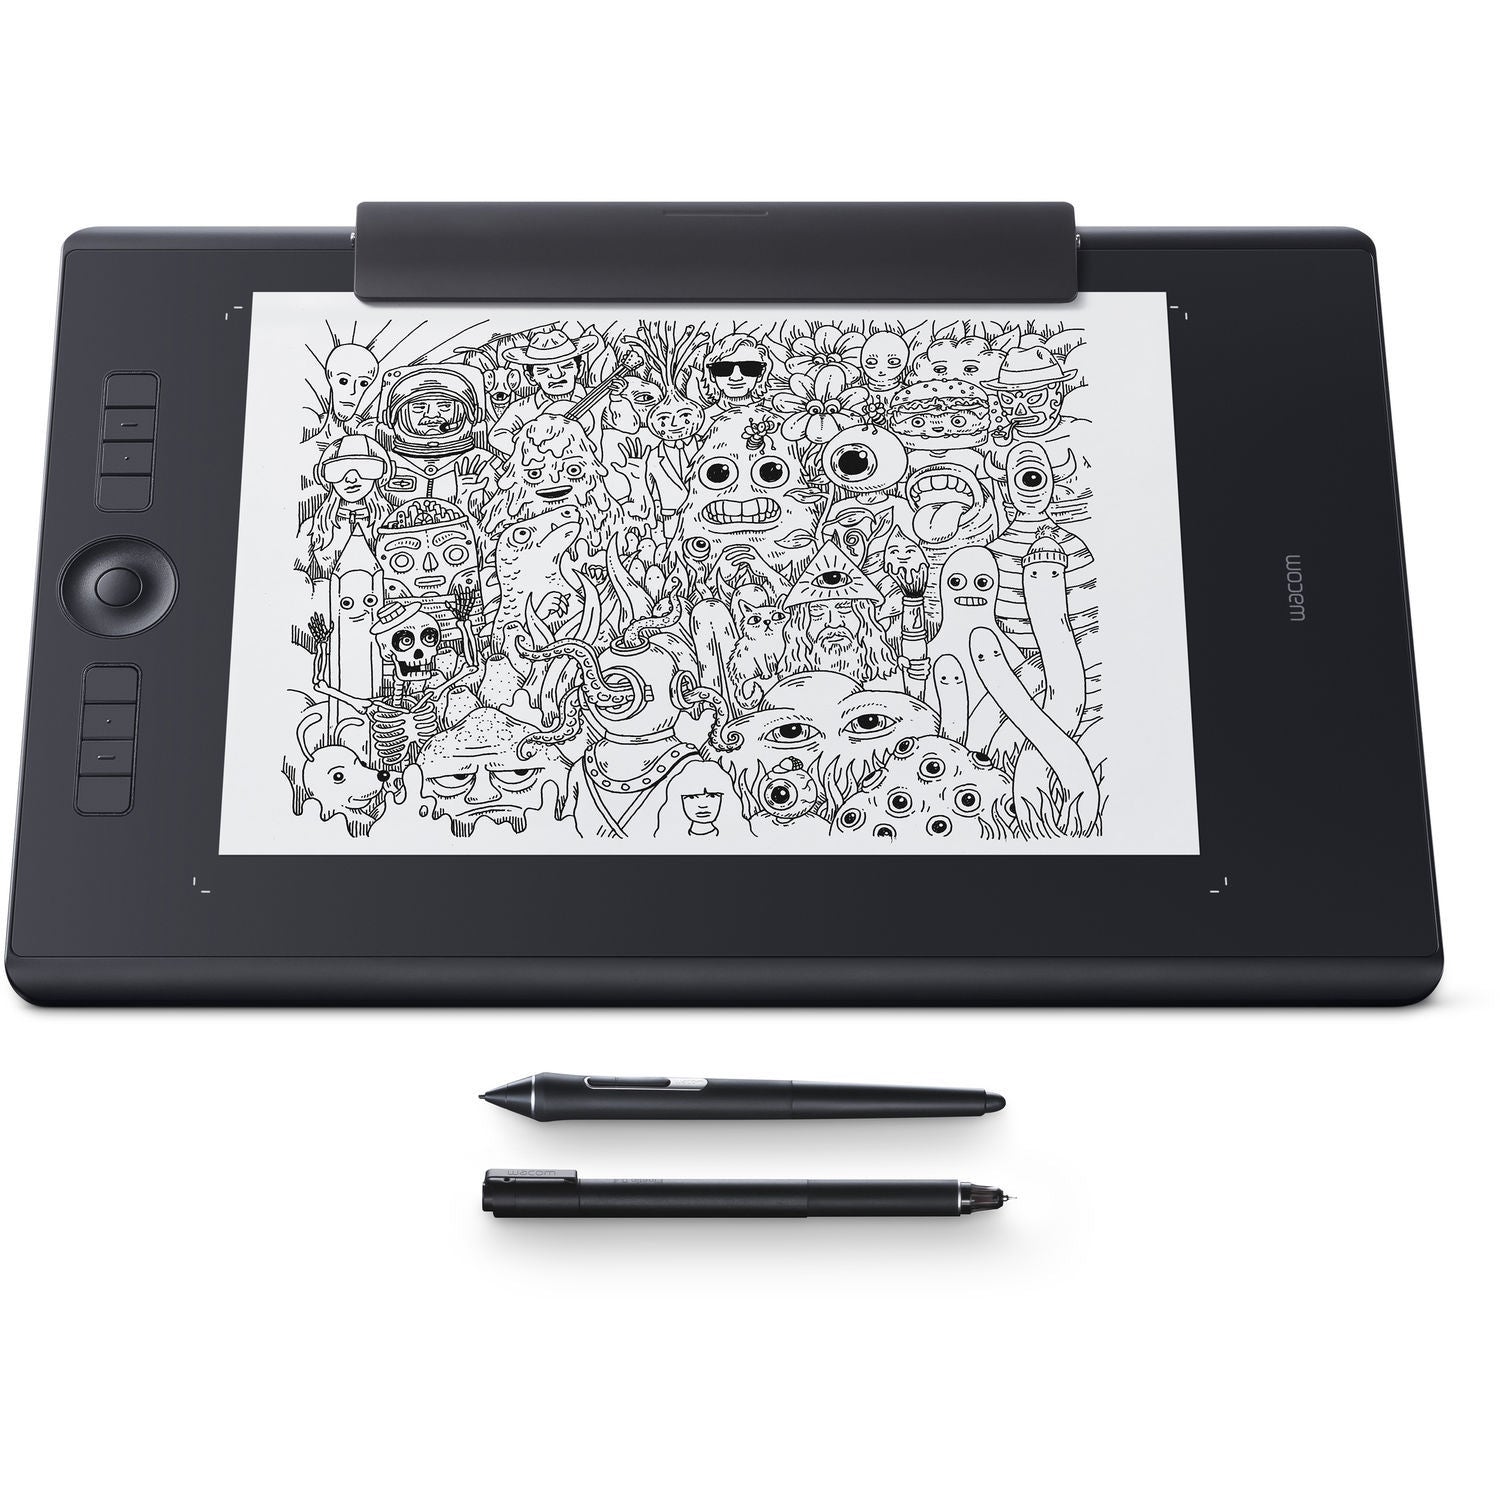 Intuos Pro Paper Edition Medium Drawing Graphics Tablet Board+Pro